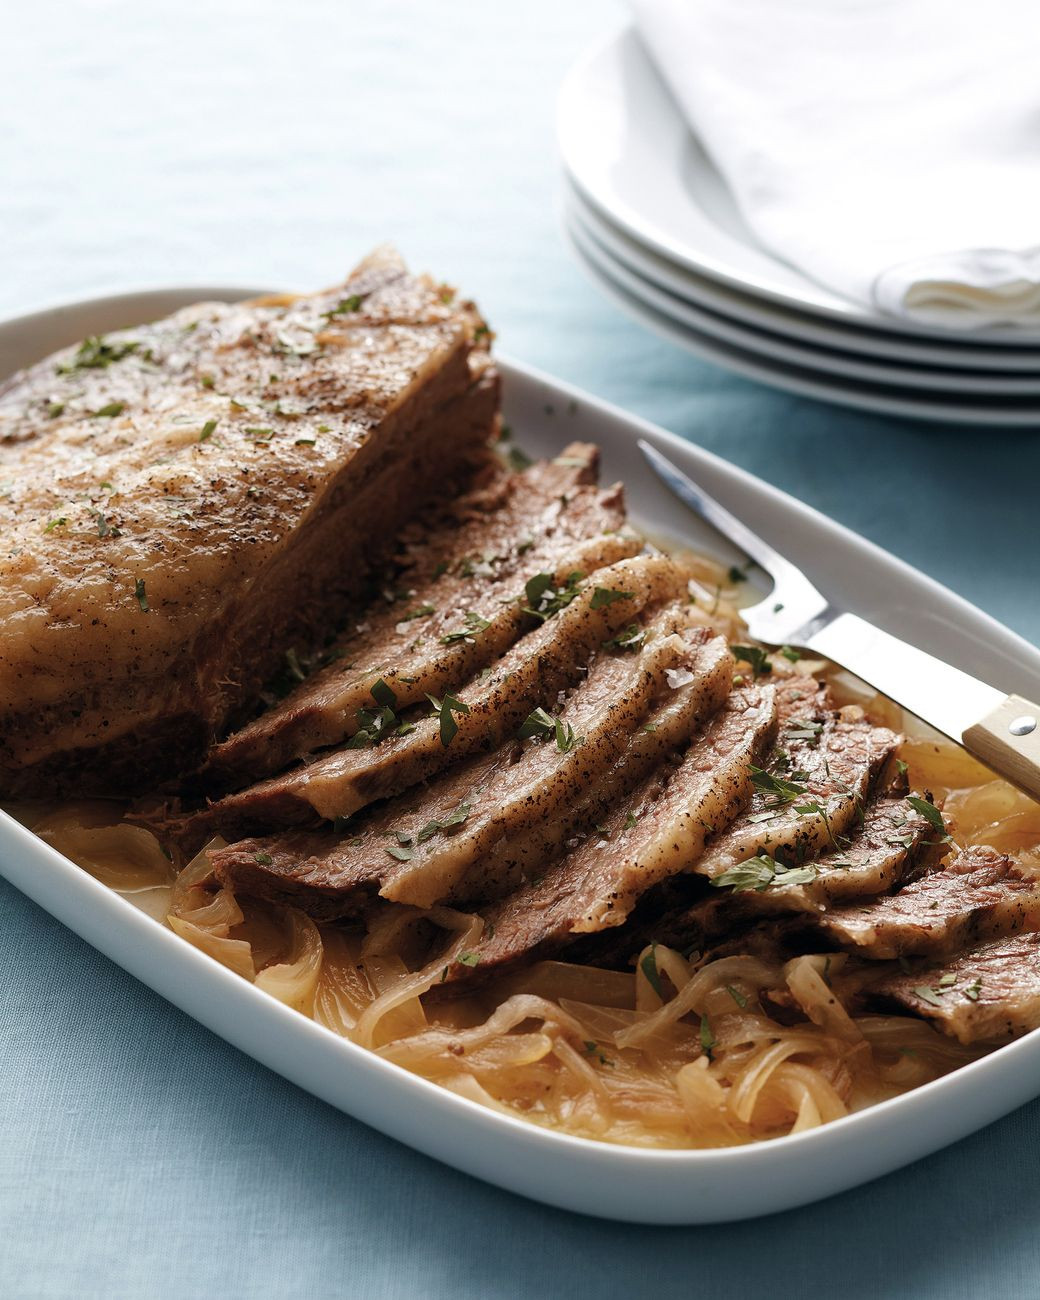 Passover Brisket Recipe Onion Soup Mix
 Slow Cooker Brisket and ions Recipe